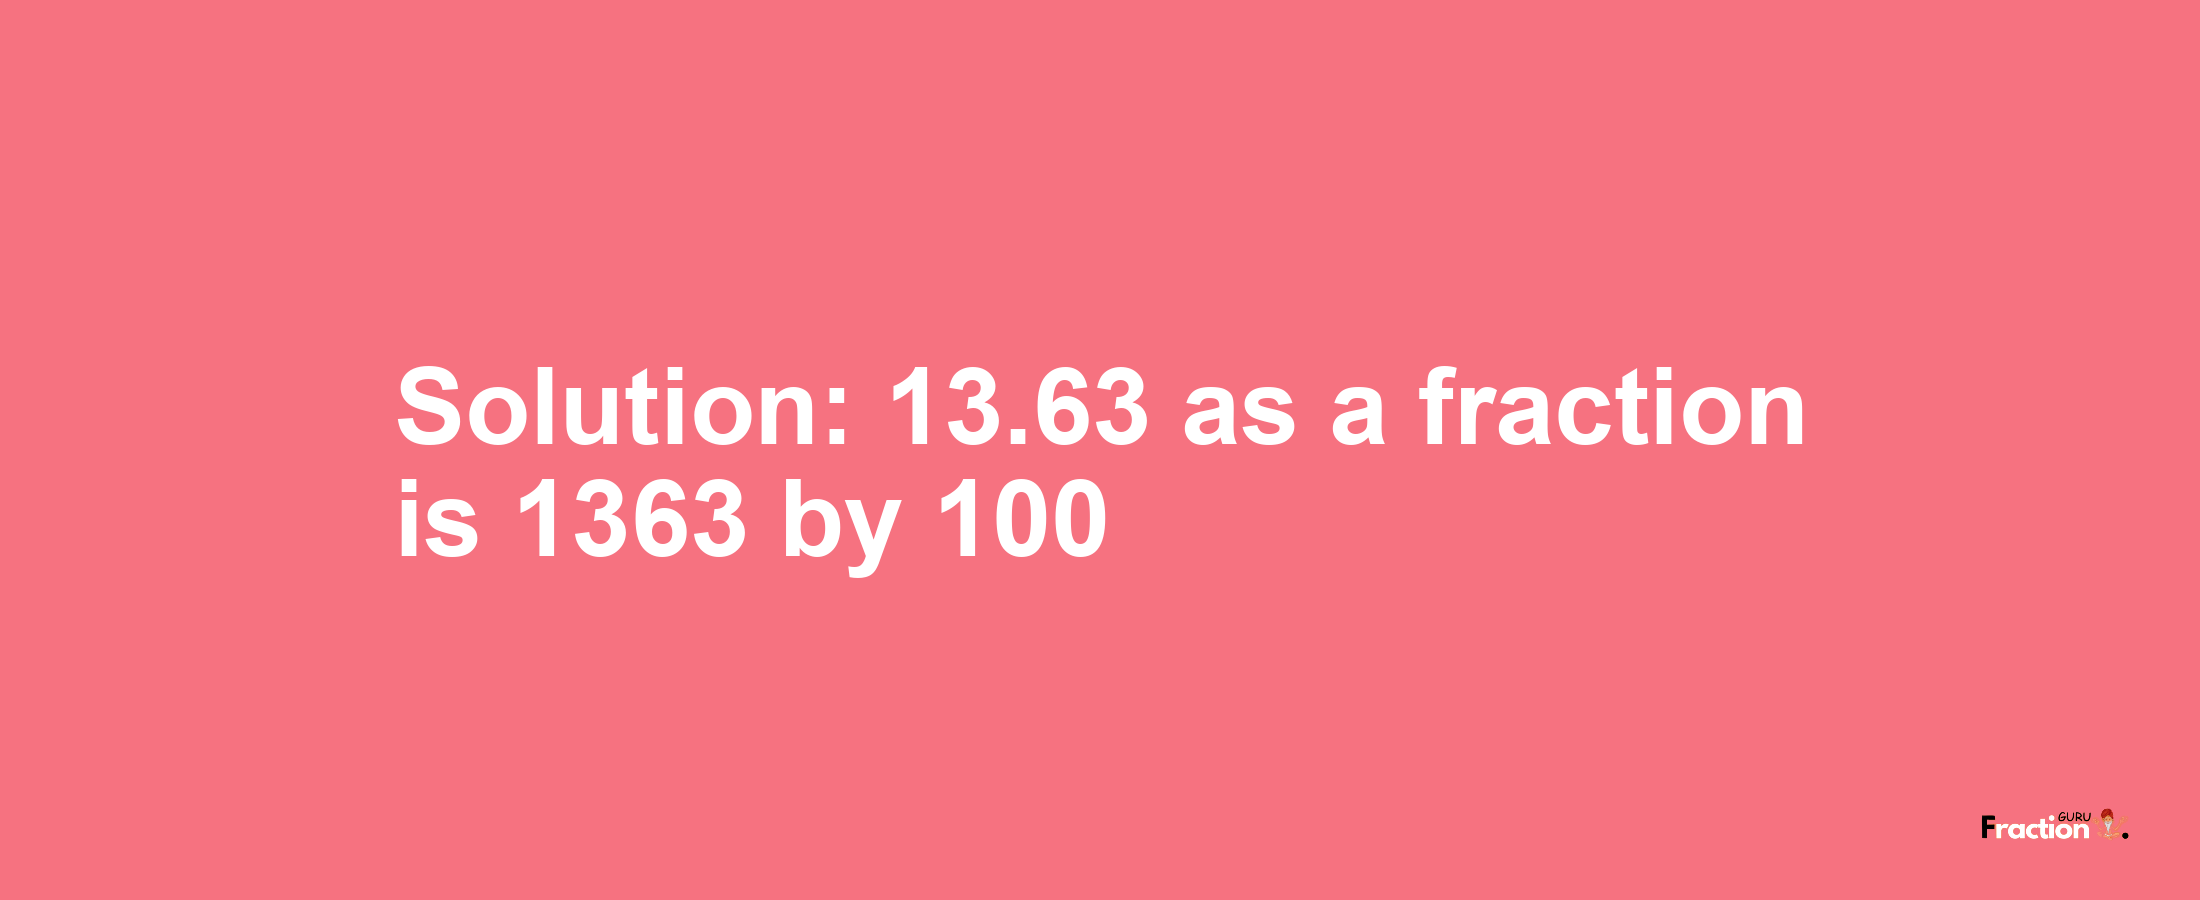 Solution:13.63 as a fraction is 1363/100